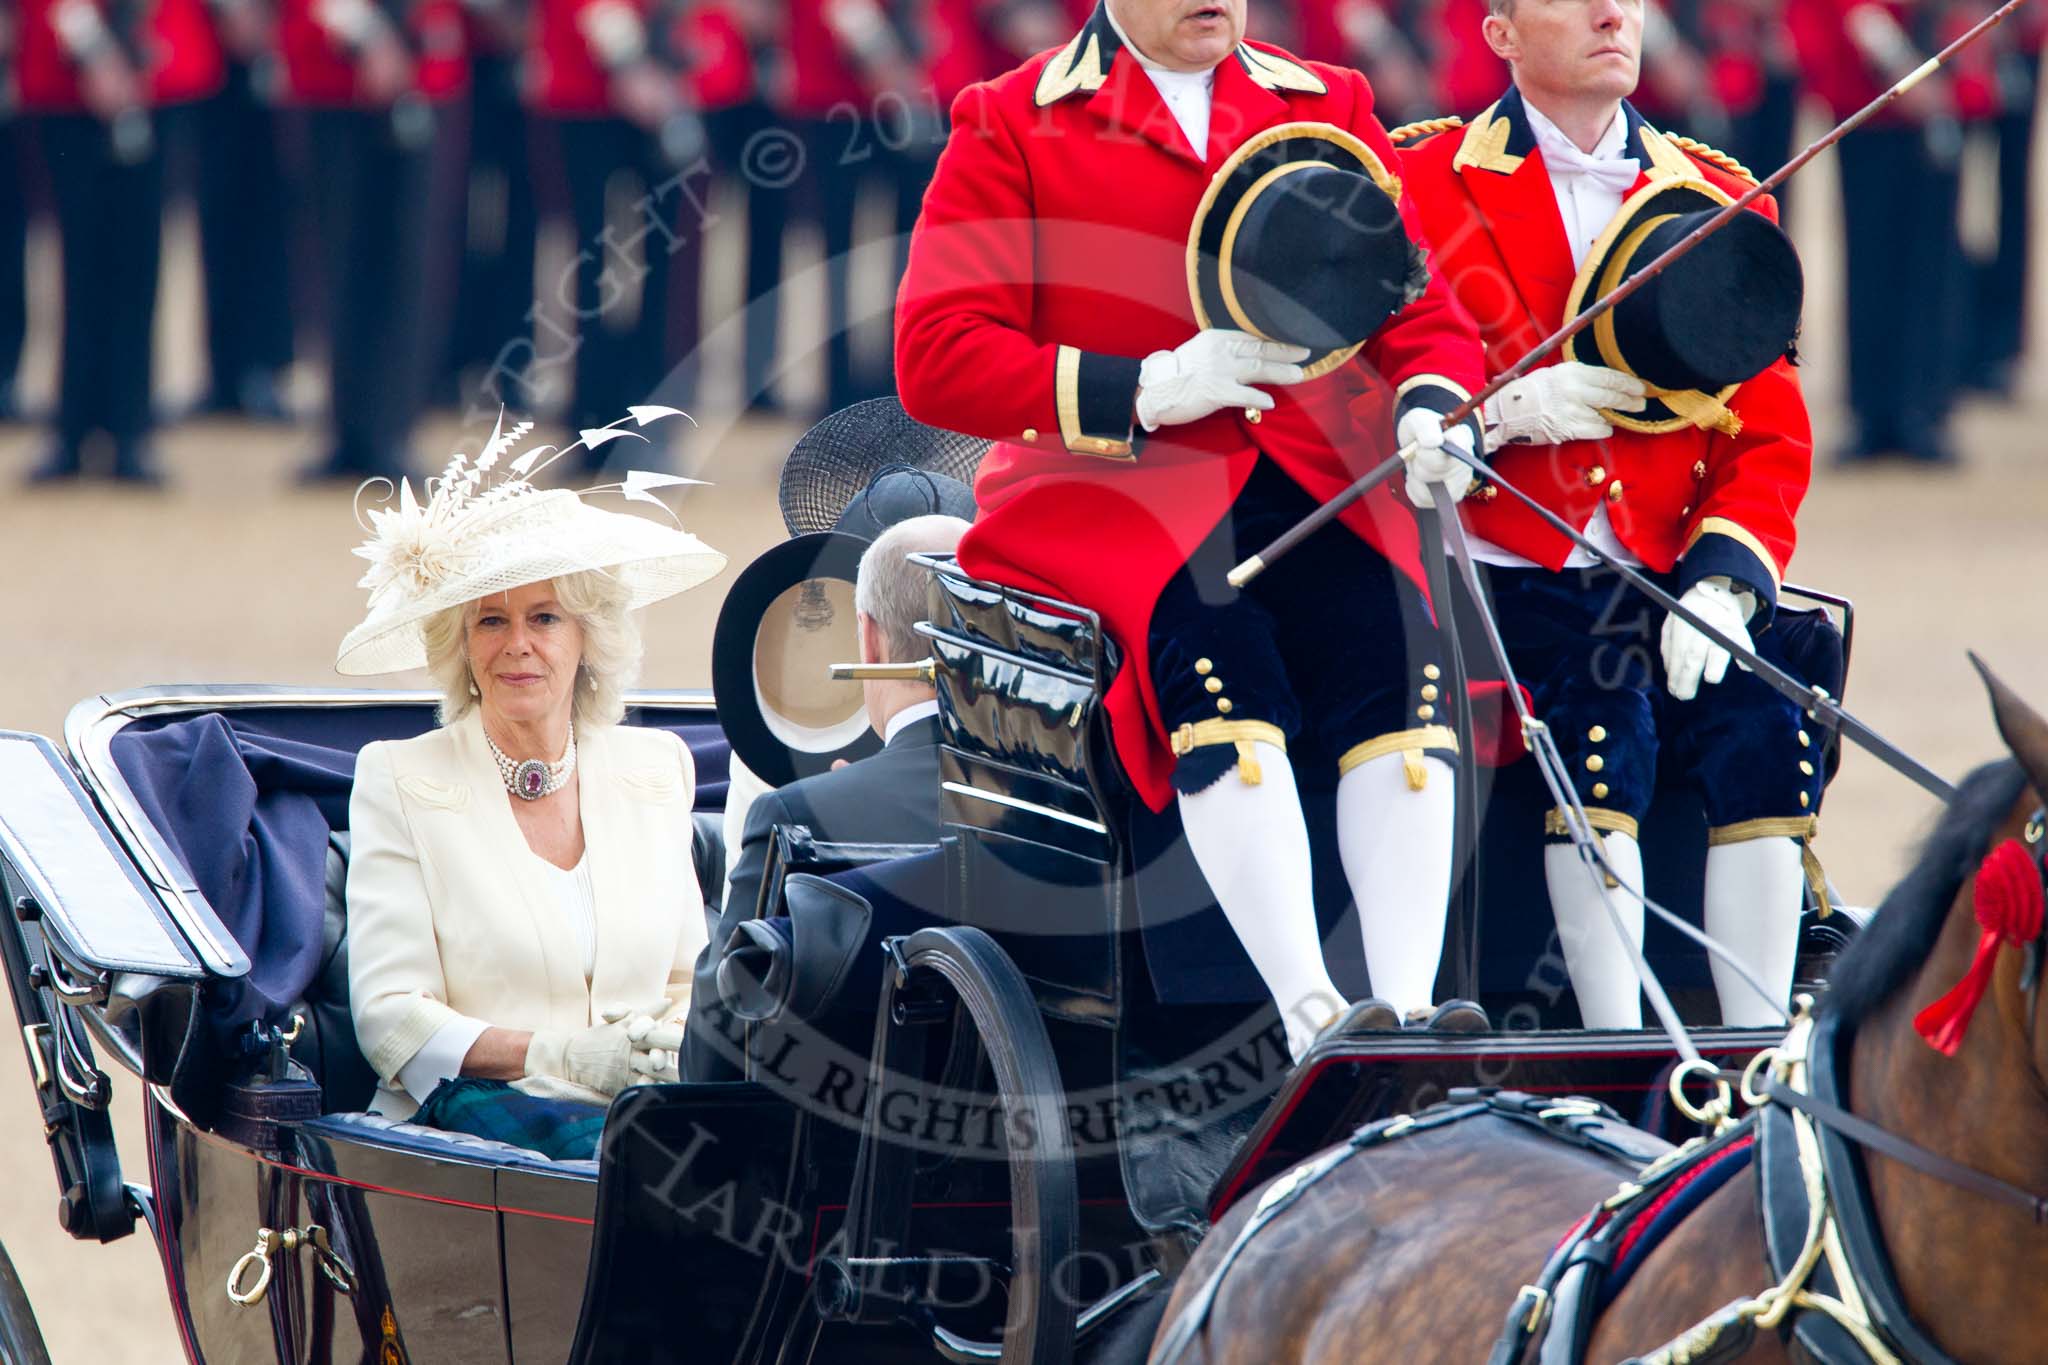 Trooping the Colour 2011: In the first barouche carriage, HRH The Duchess of Cornwall, on her right HRH The Duchess of Cambridge (only the blue hat visible), and HRH Prince Andrew, The Duke of York, opposite..
Horse Guards Parade, Westminster,
London SW1,
Greater London,
United Kingdom,
on 11 June 2011 at 10:50, image #88